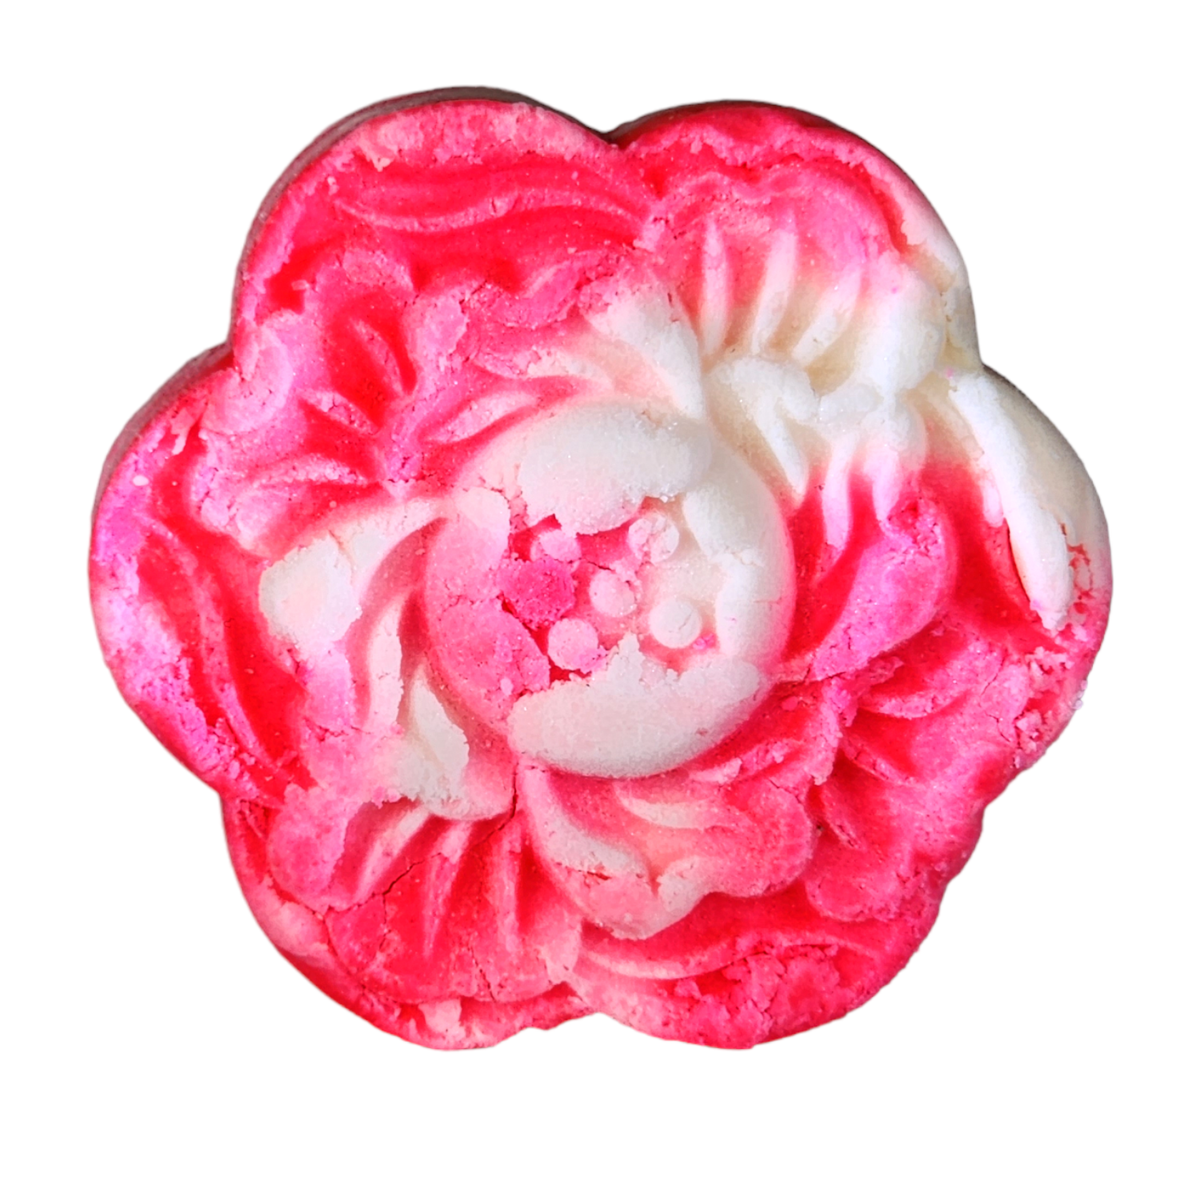 Bubble Bar -Avail in 12 Scents -Fill your Tub with Bubbles!: Watermelon